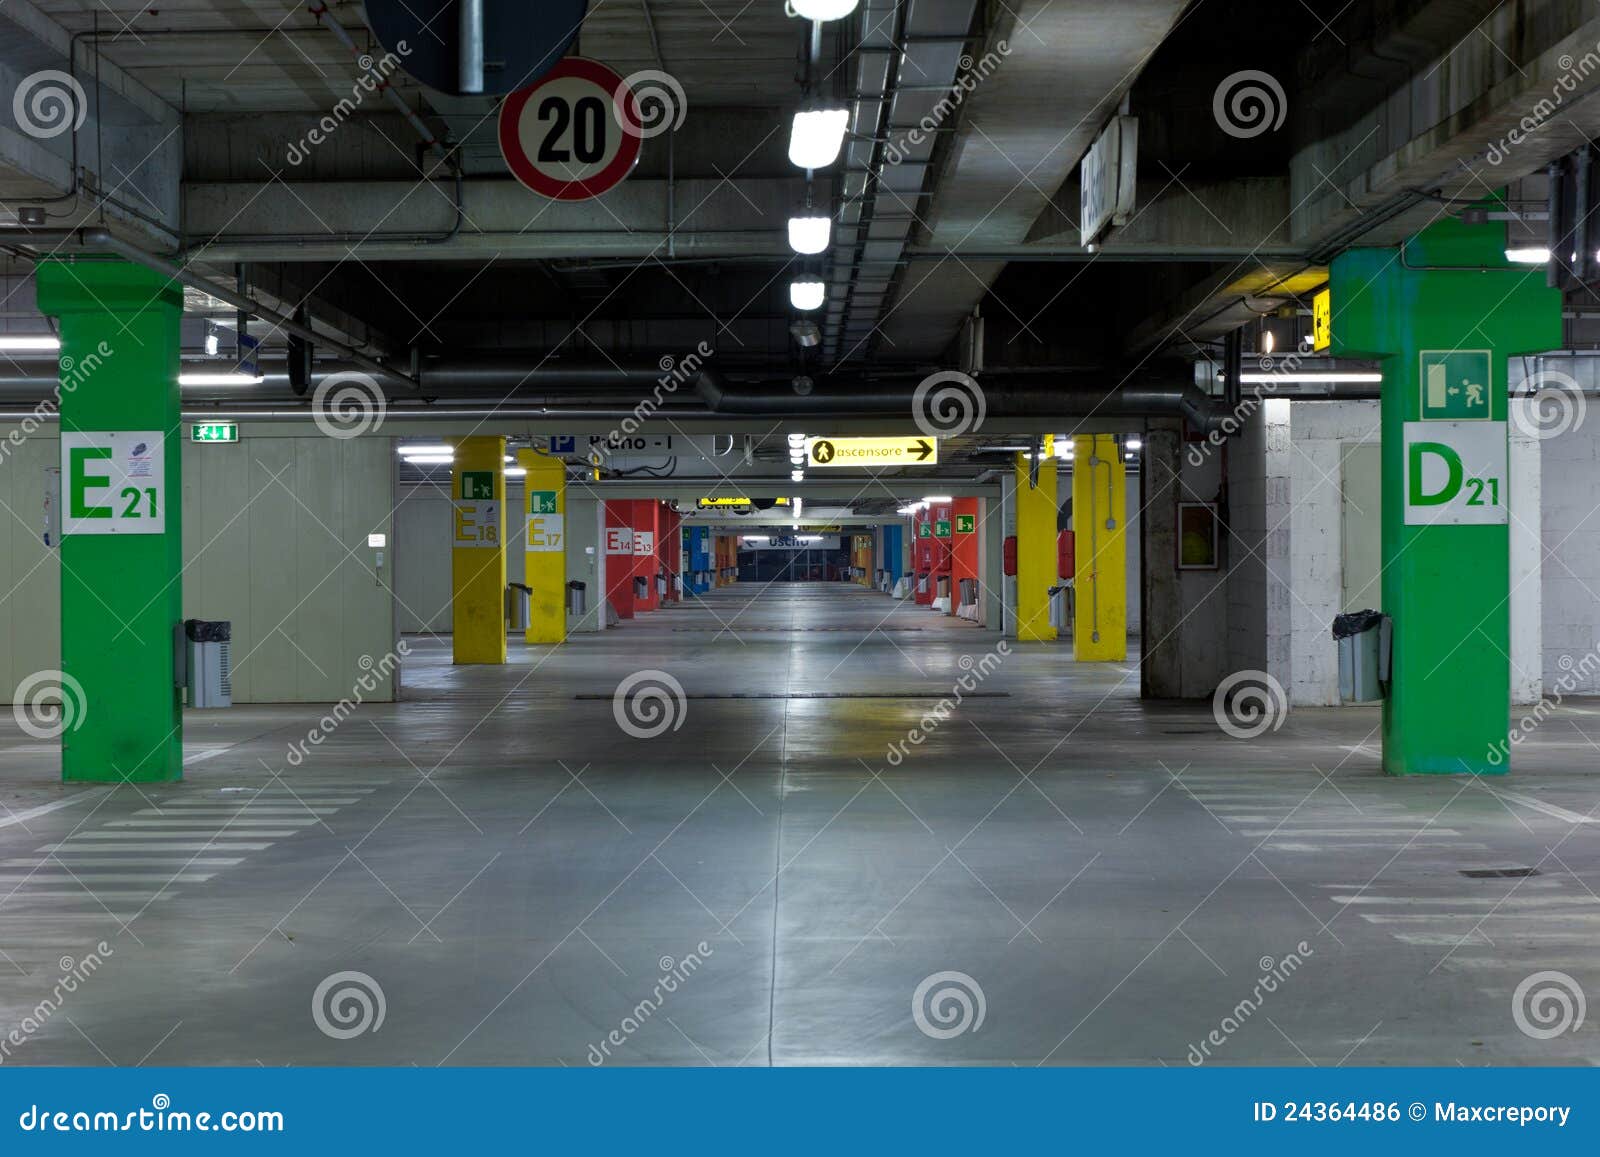 Car`s parking stock photo. Image of symbol, crossing - 24364486